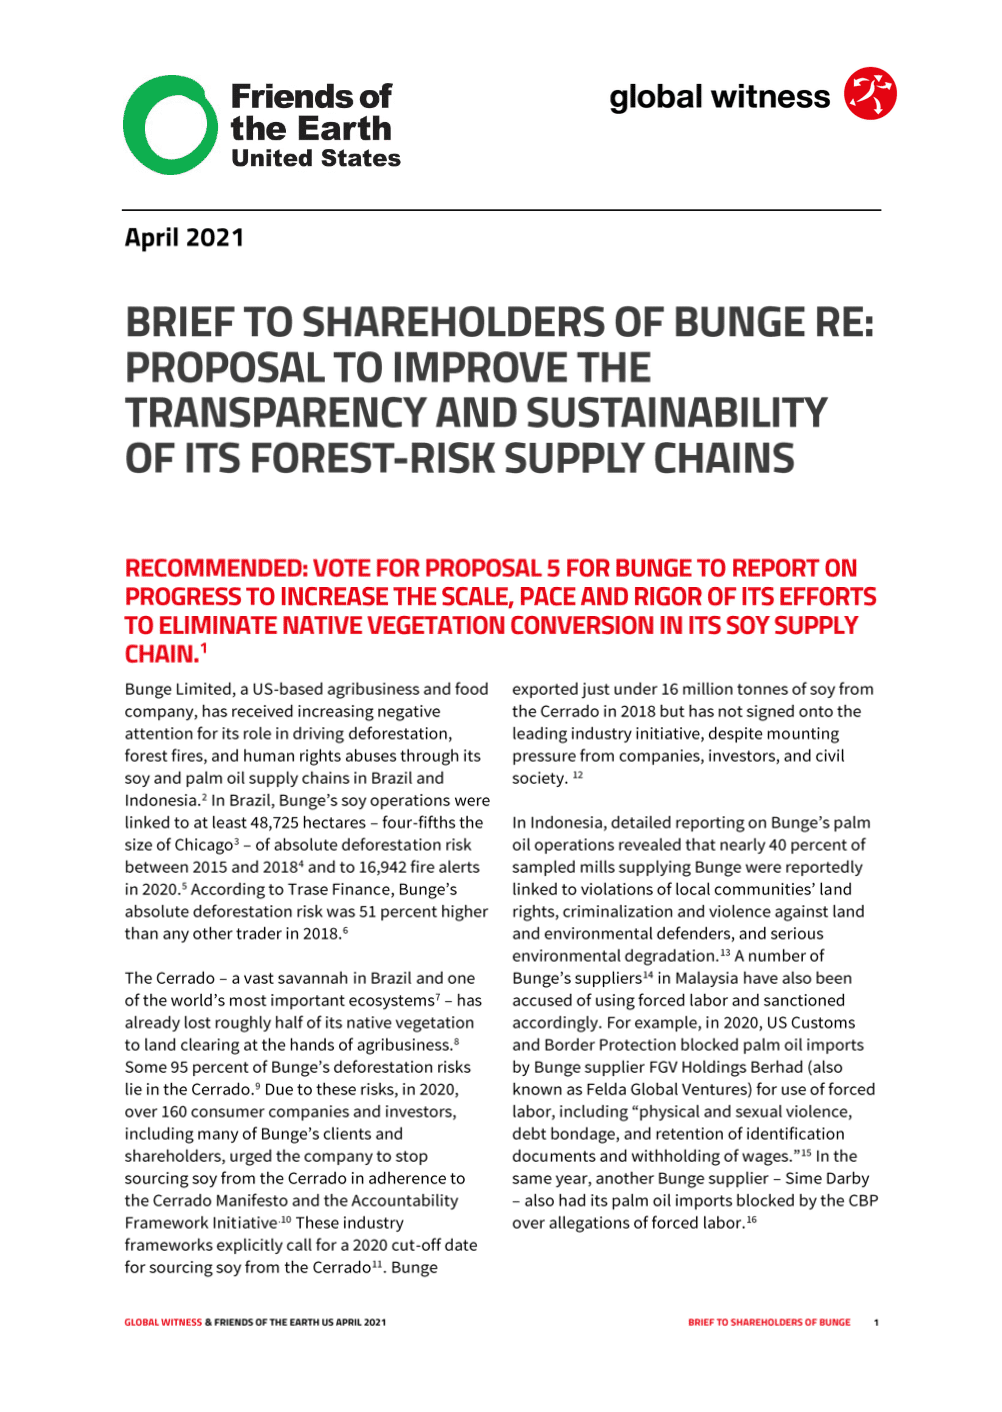 Brief to Shareholders of Bunge April 2021